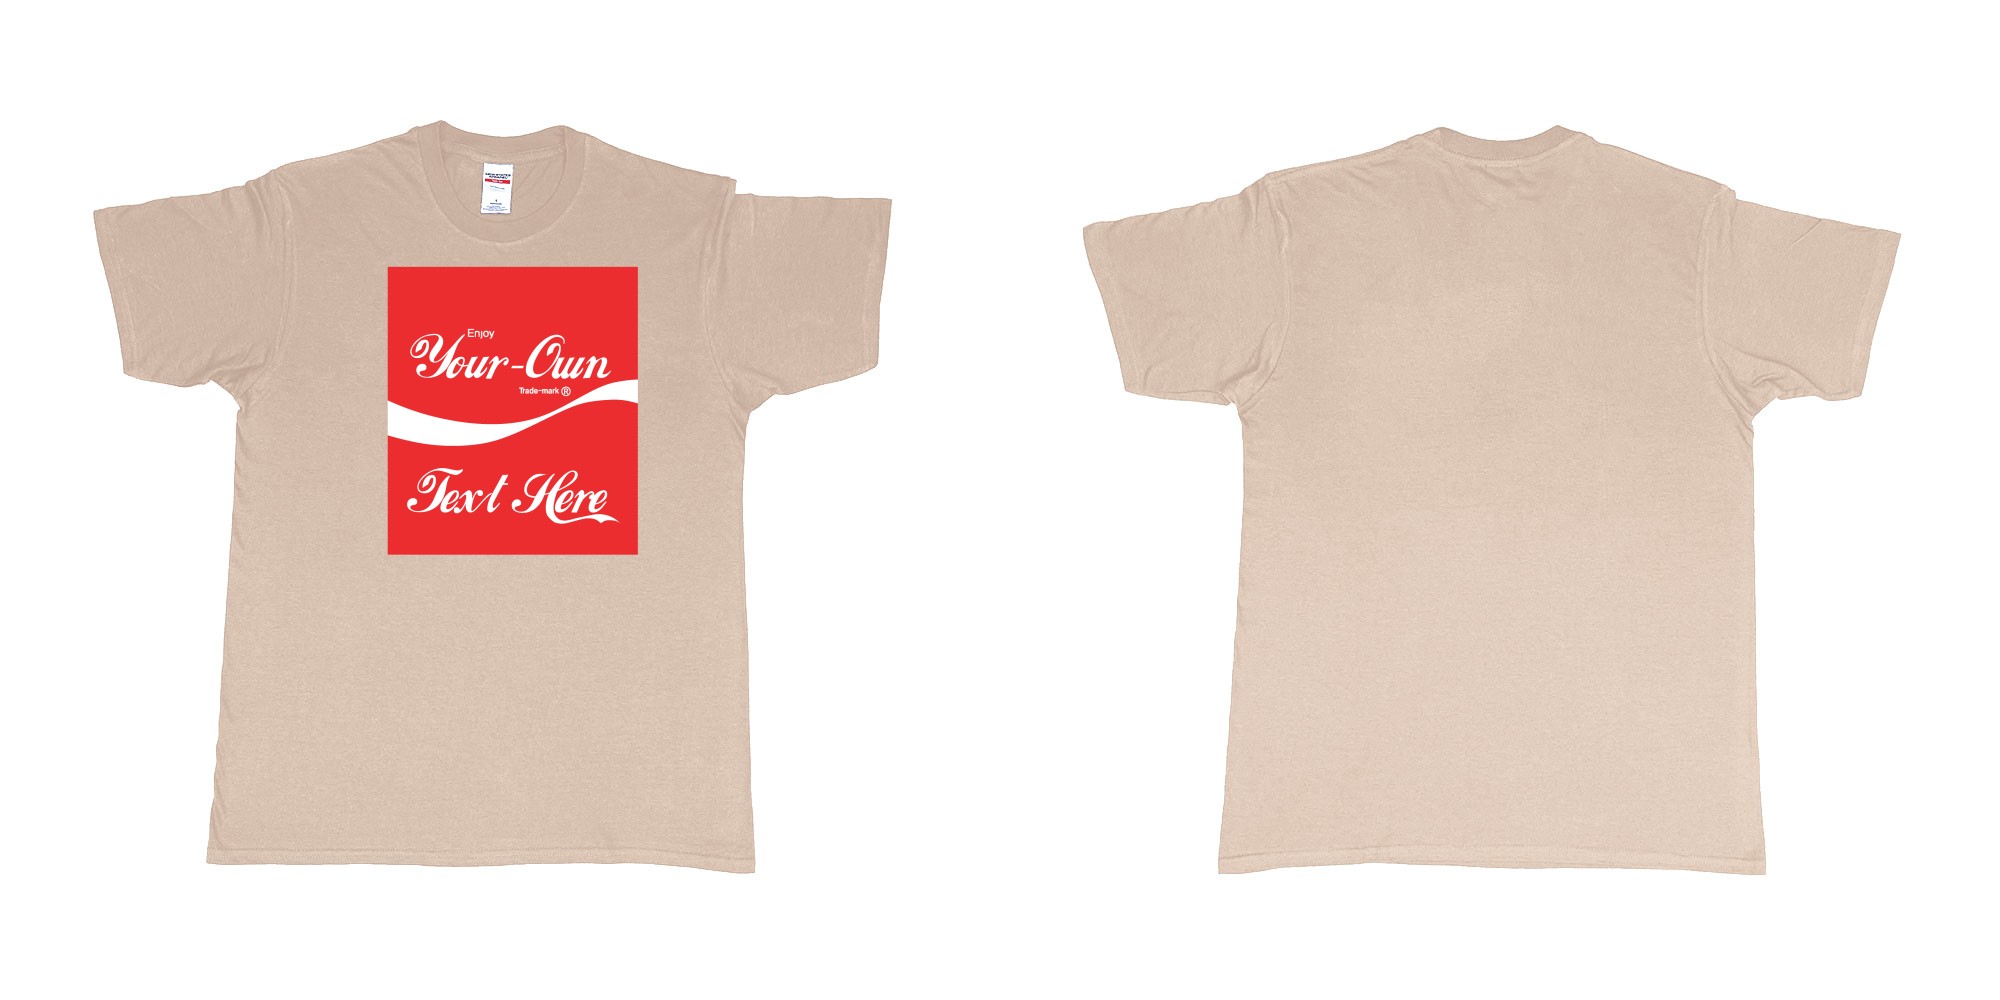 Custom tshirt design Coca Cola in fabric color sand choice your own text made in Bali by The Pirate Way